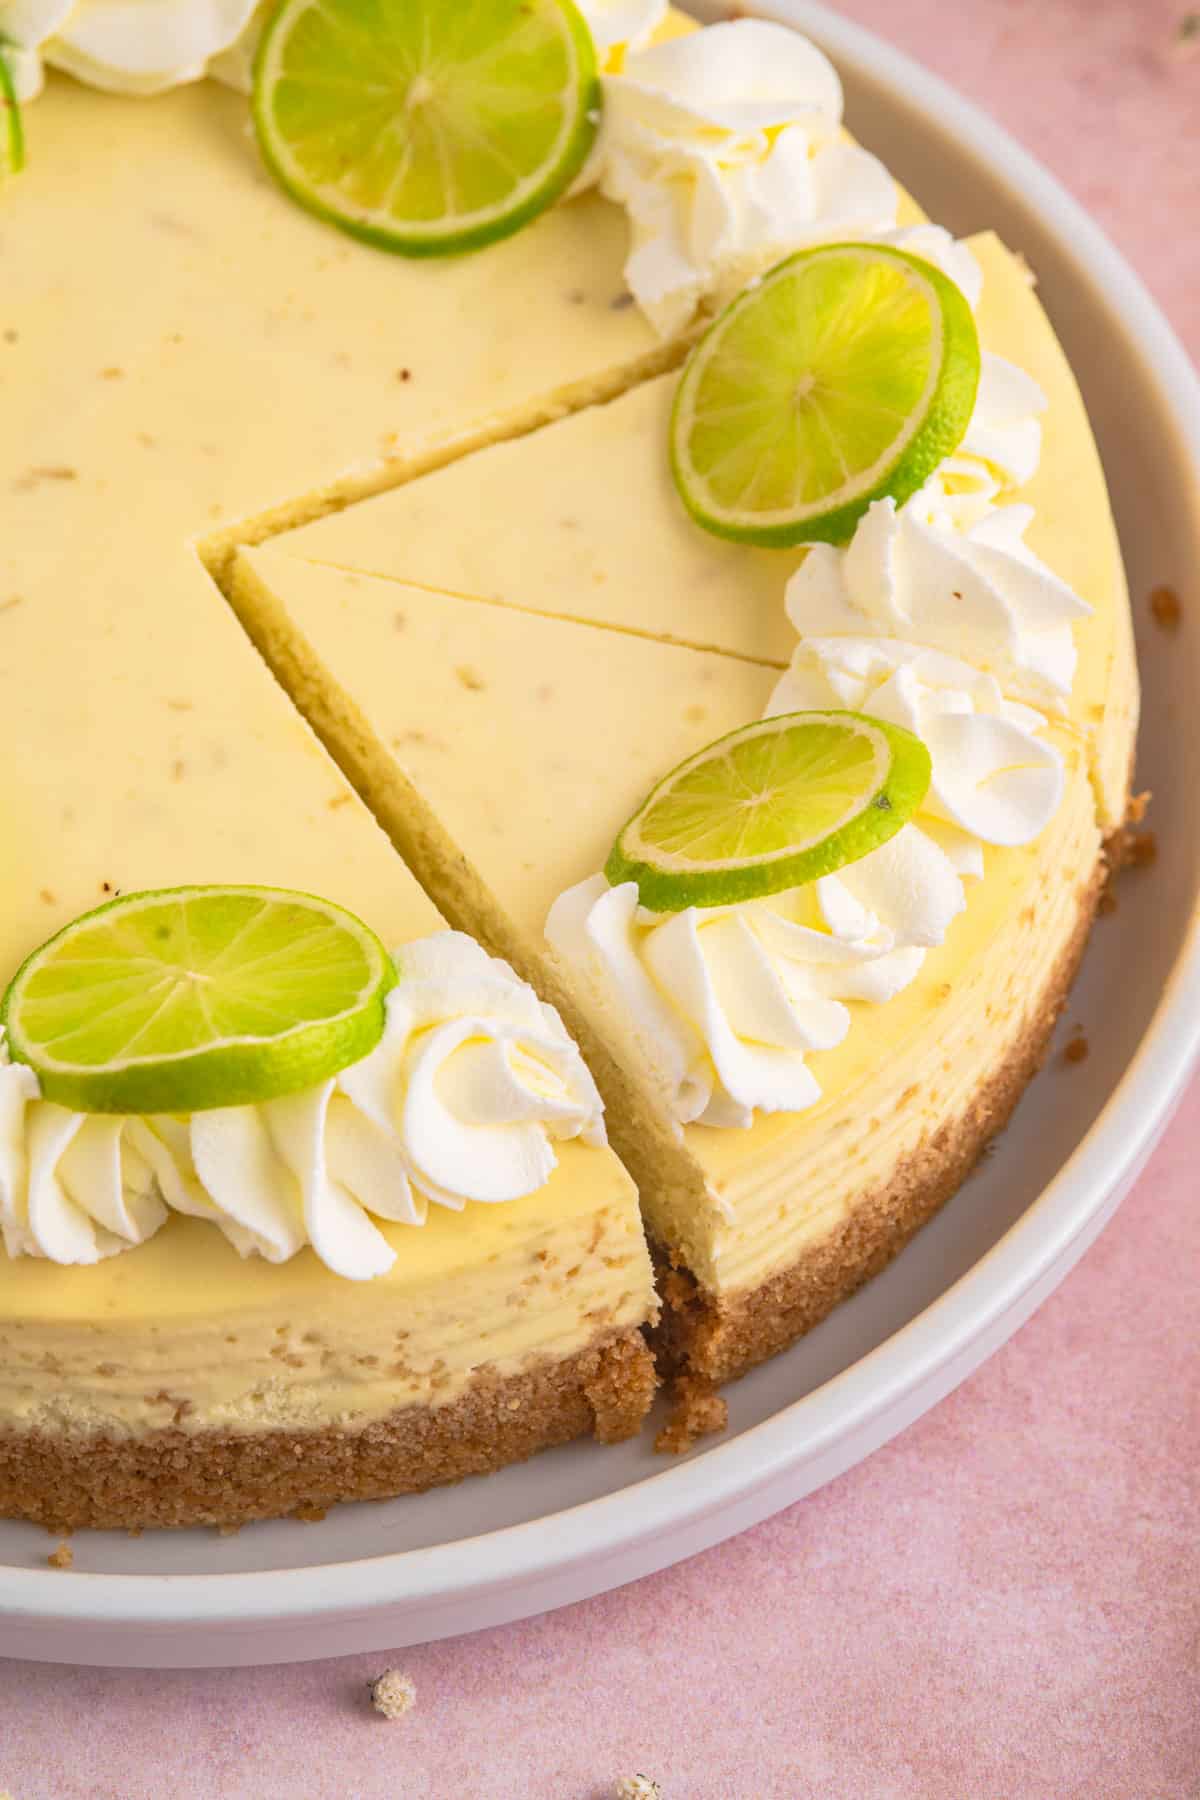 lime cheesecake cut in two slices on a plate